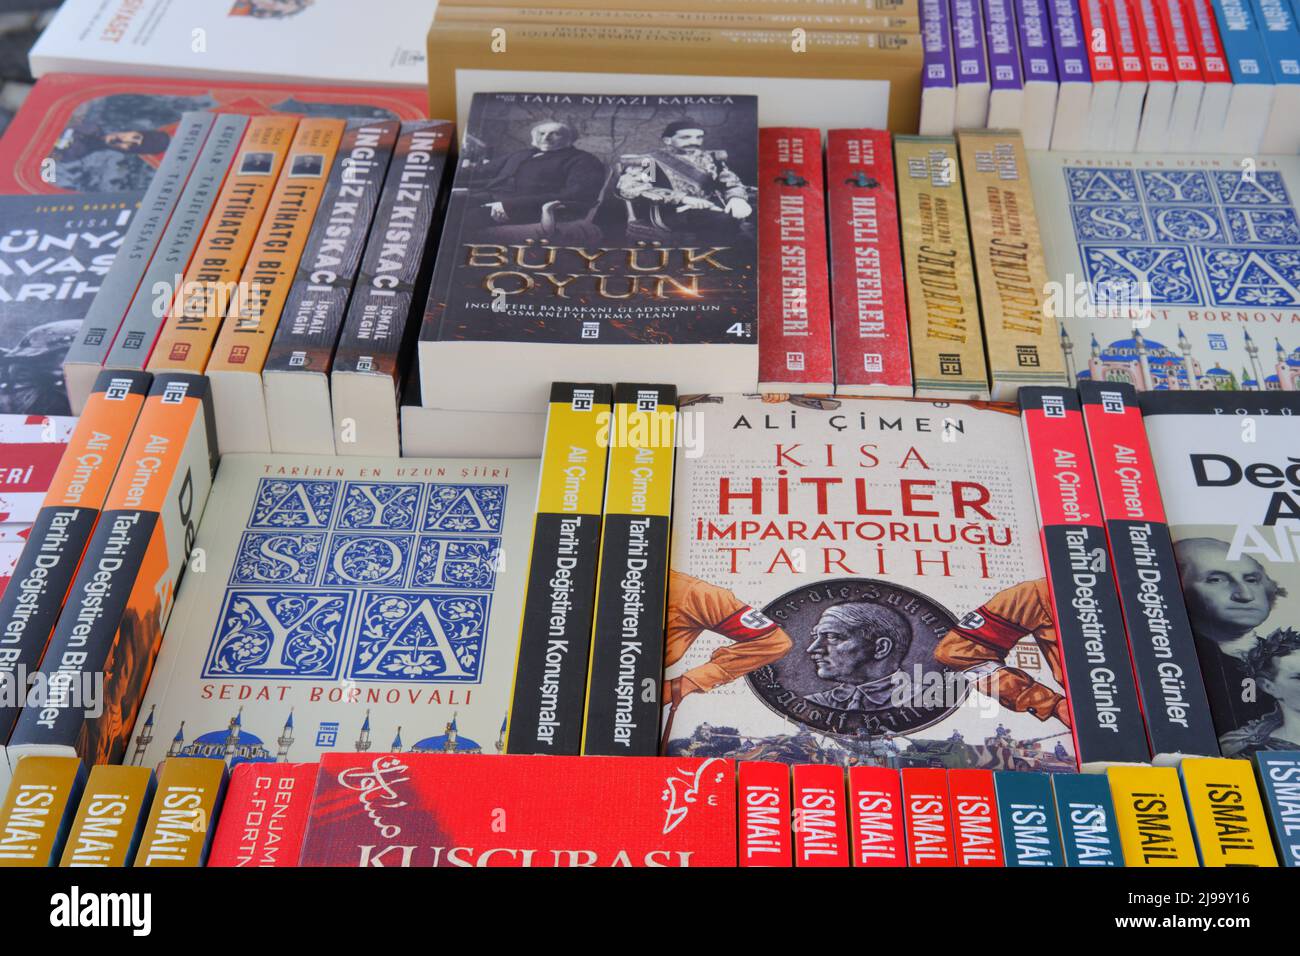 Books in Turkish displayed on table for sale at a book fair Stock Photo